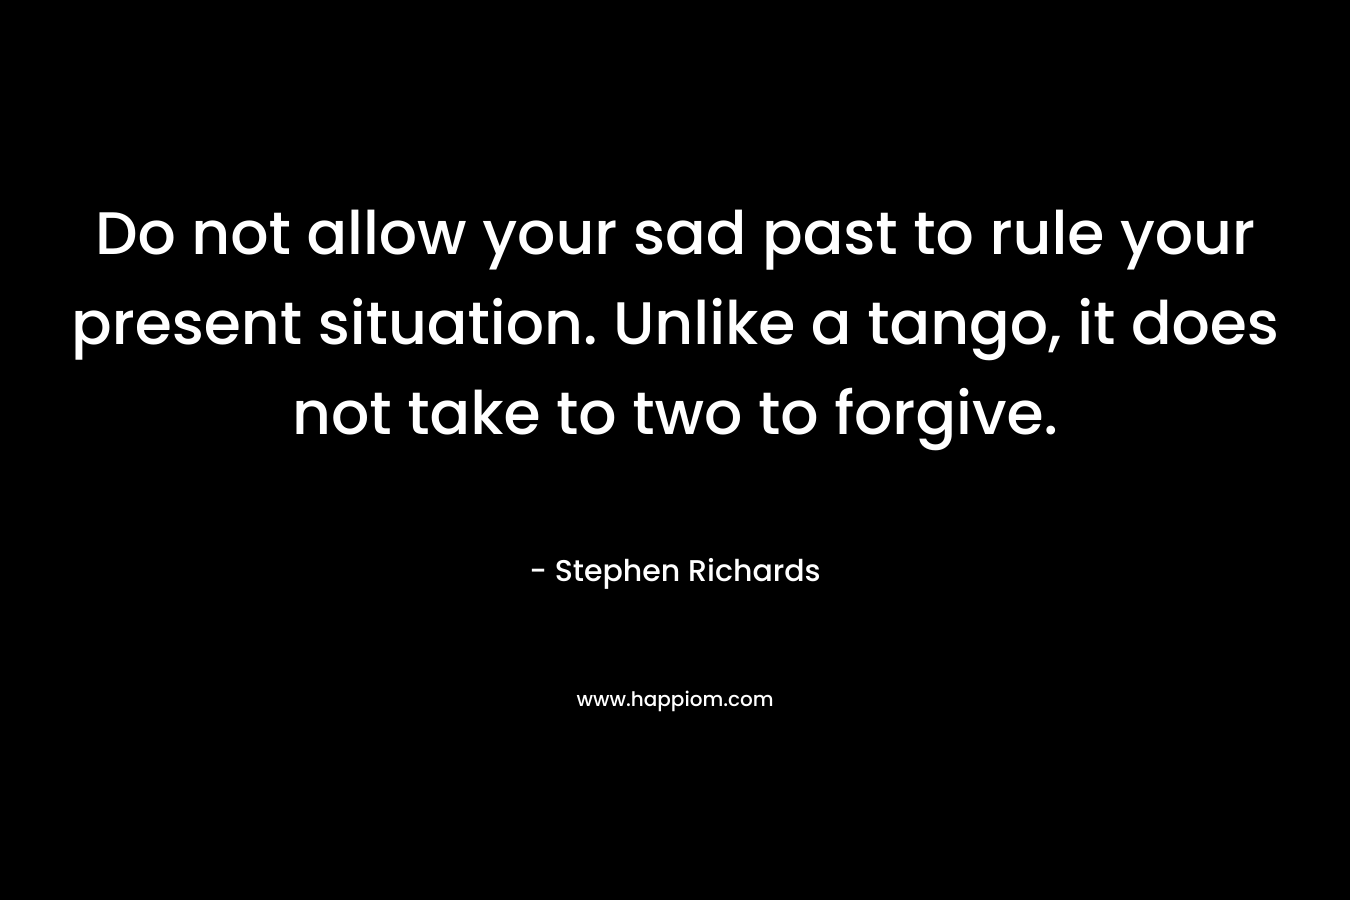 Do not allow your sad past to rule your present situation. Unlike a tango, it does not take to two to forgive. – Stephen Richards